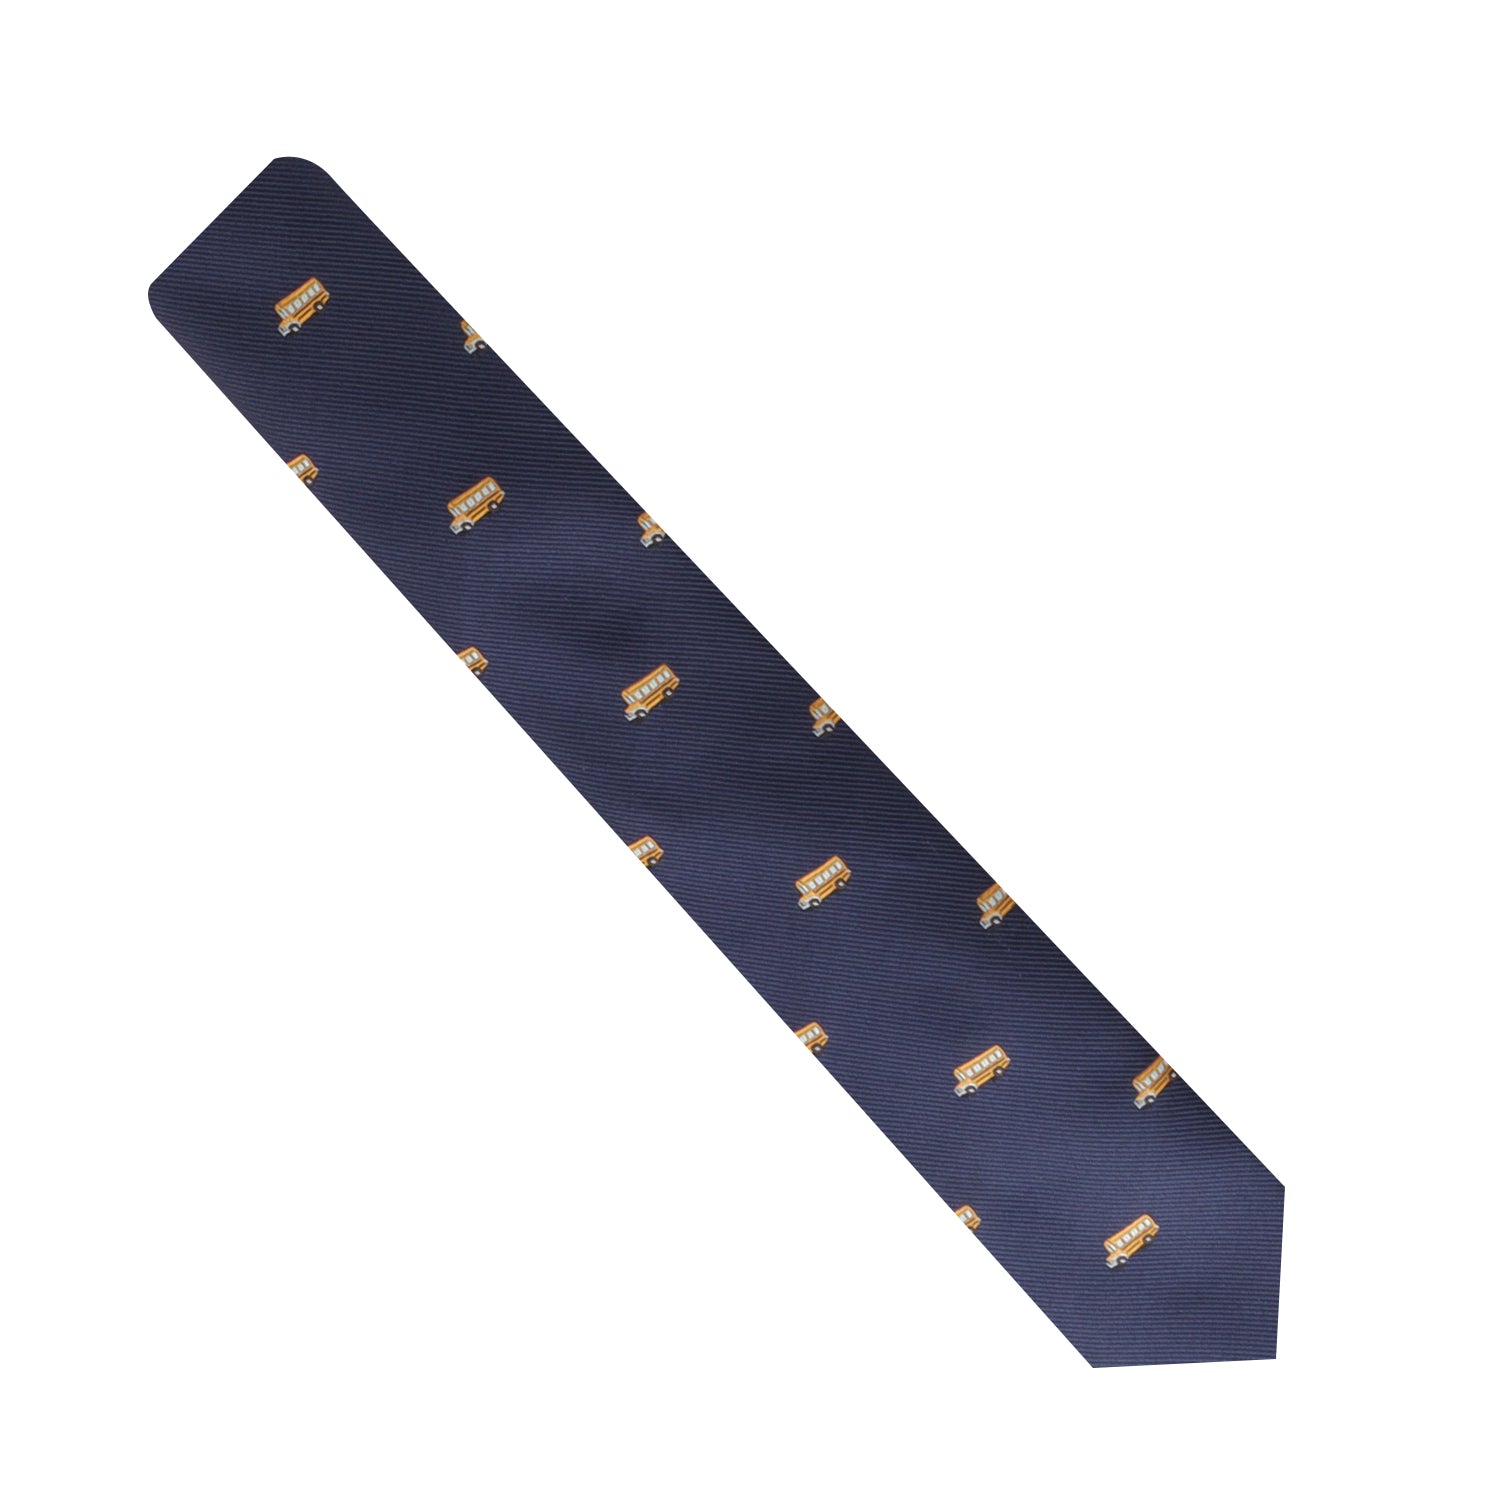 School Bus Skinny Tie with a pattern of small, gold saxophones, displayed diagonally on a white background.